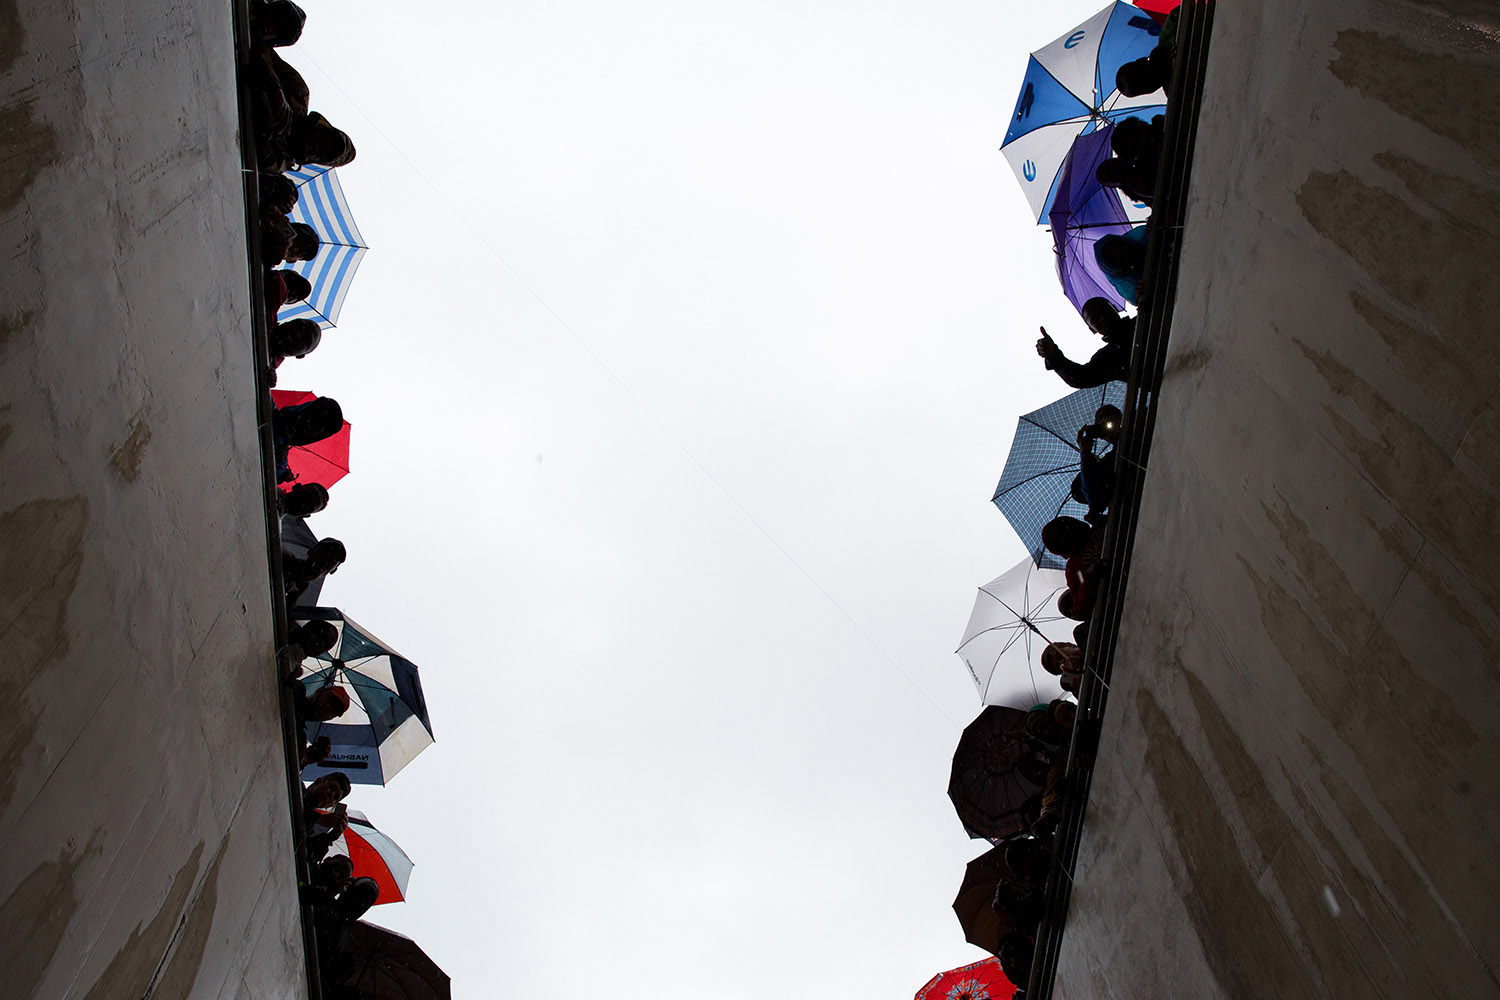 Attendees look down into a stadium entrance at the state memorial service for former South African President Nelson Mandela in Johannesburg.